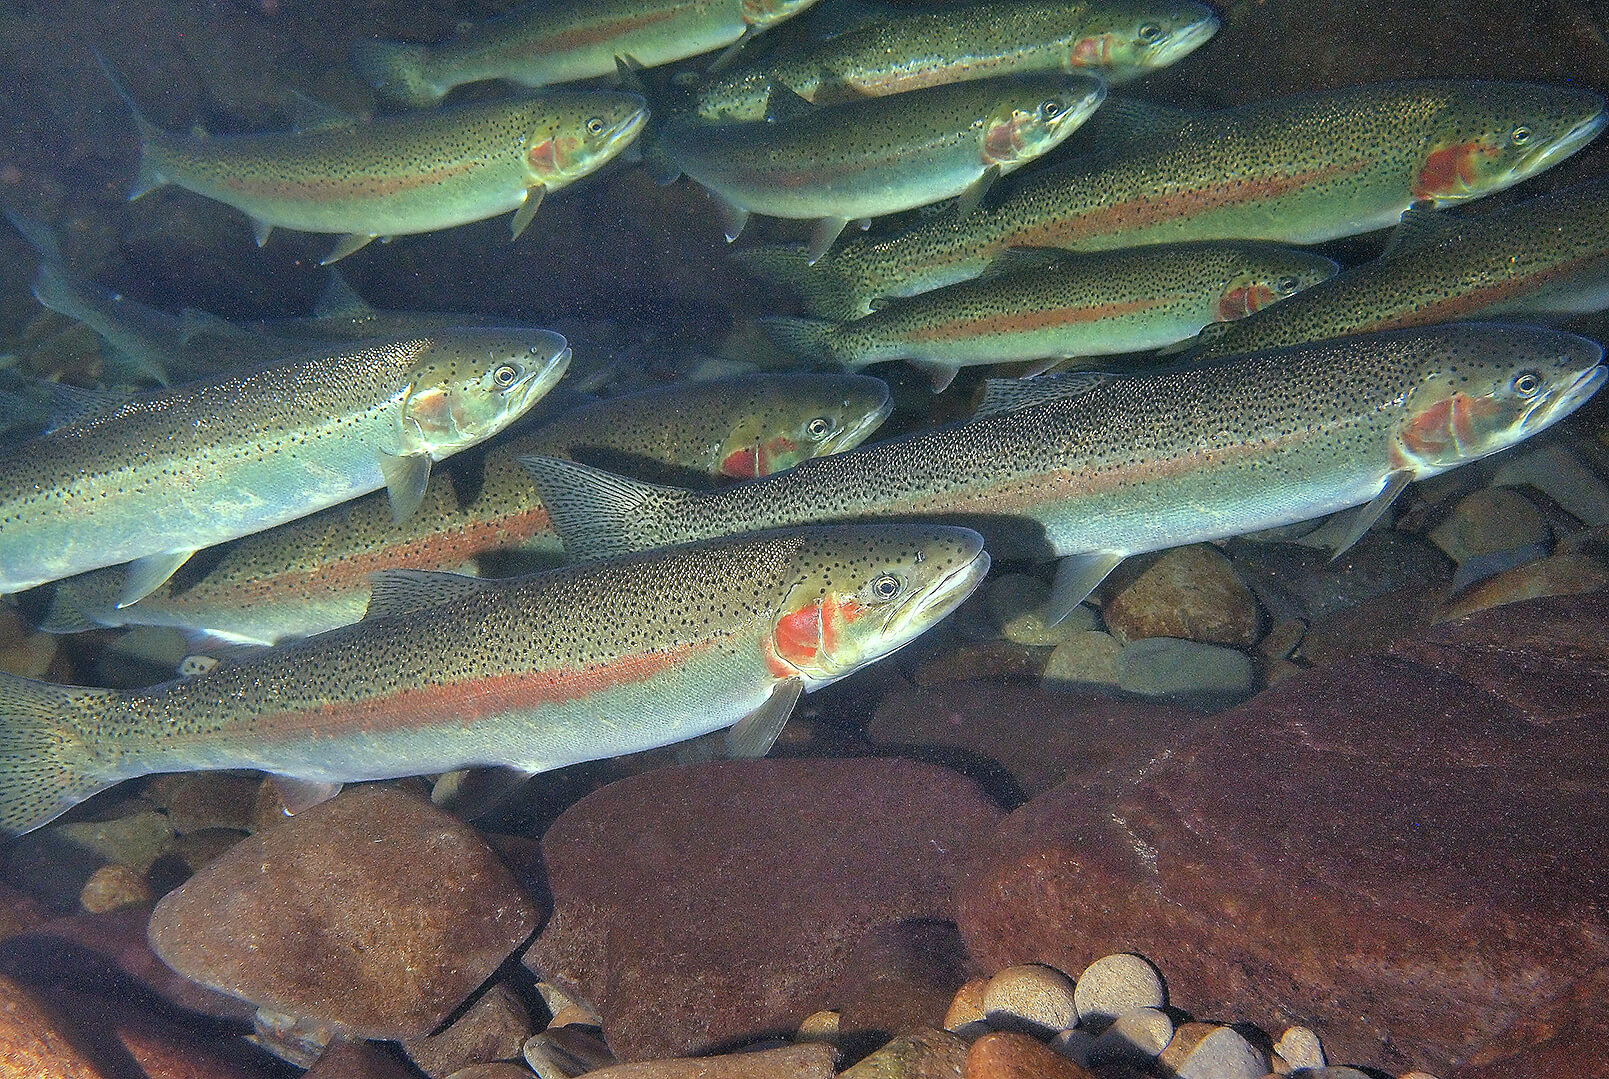 Ocean-migrating trout adapt to freshwater environment in 120 years